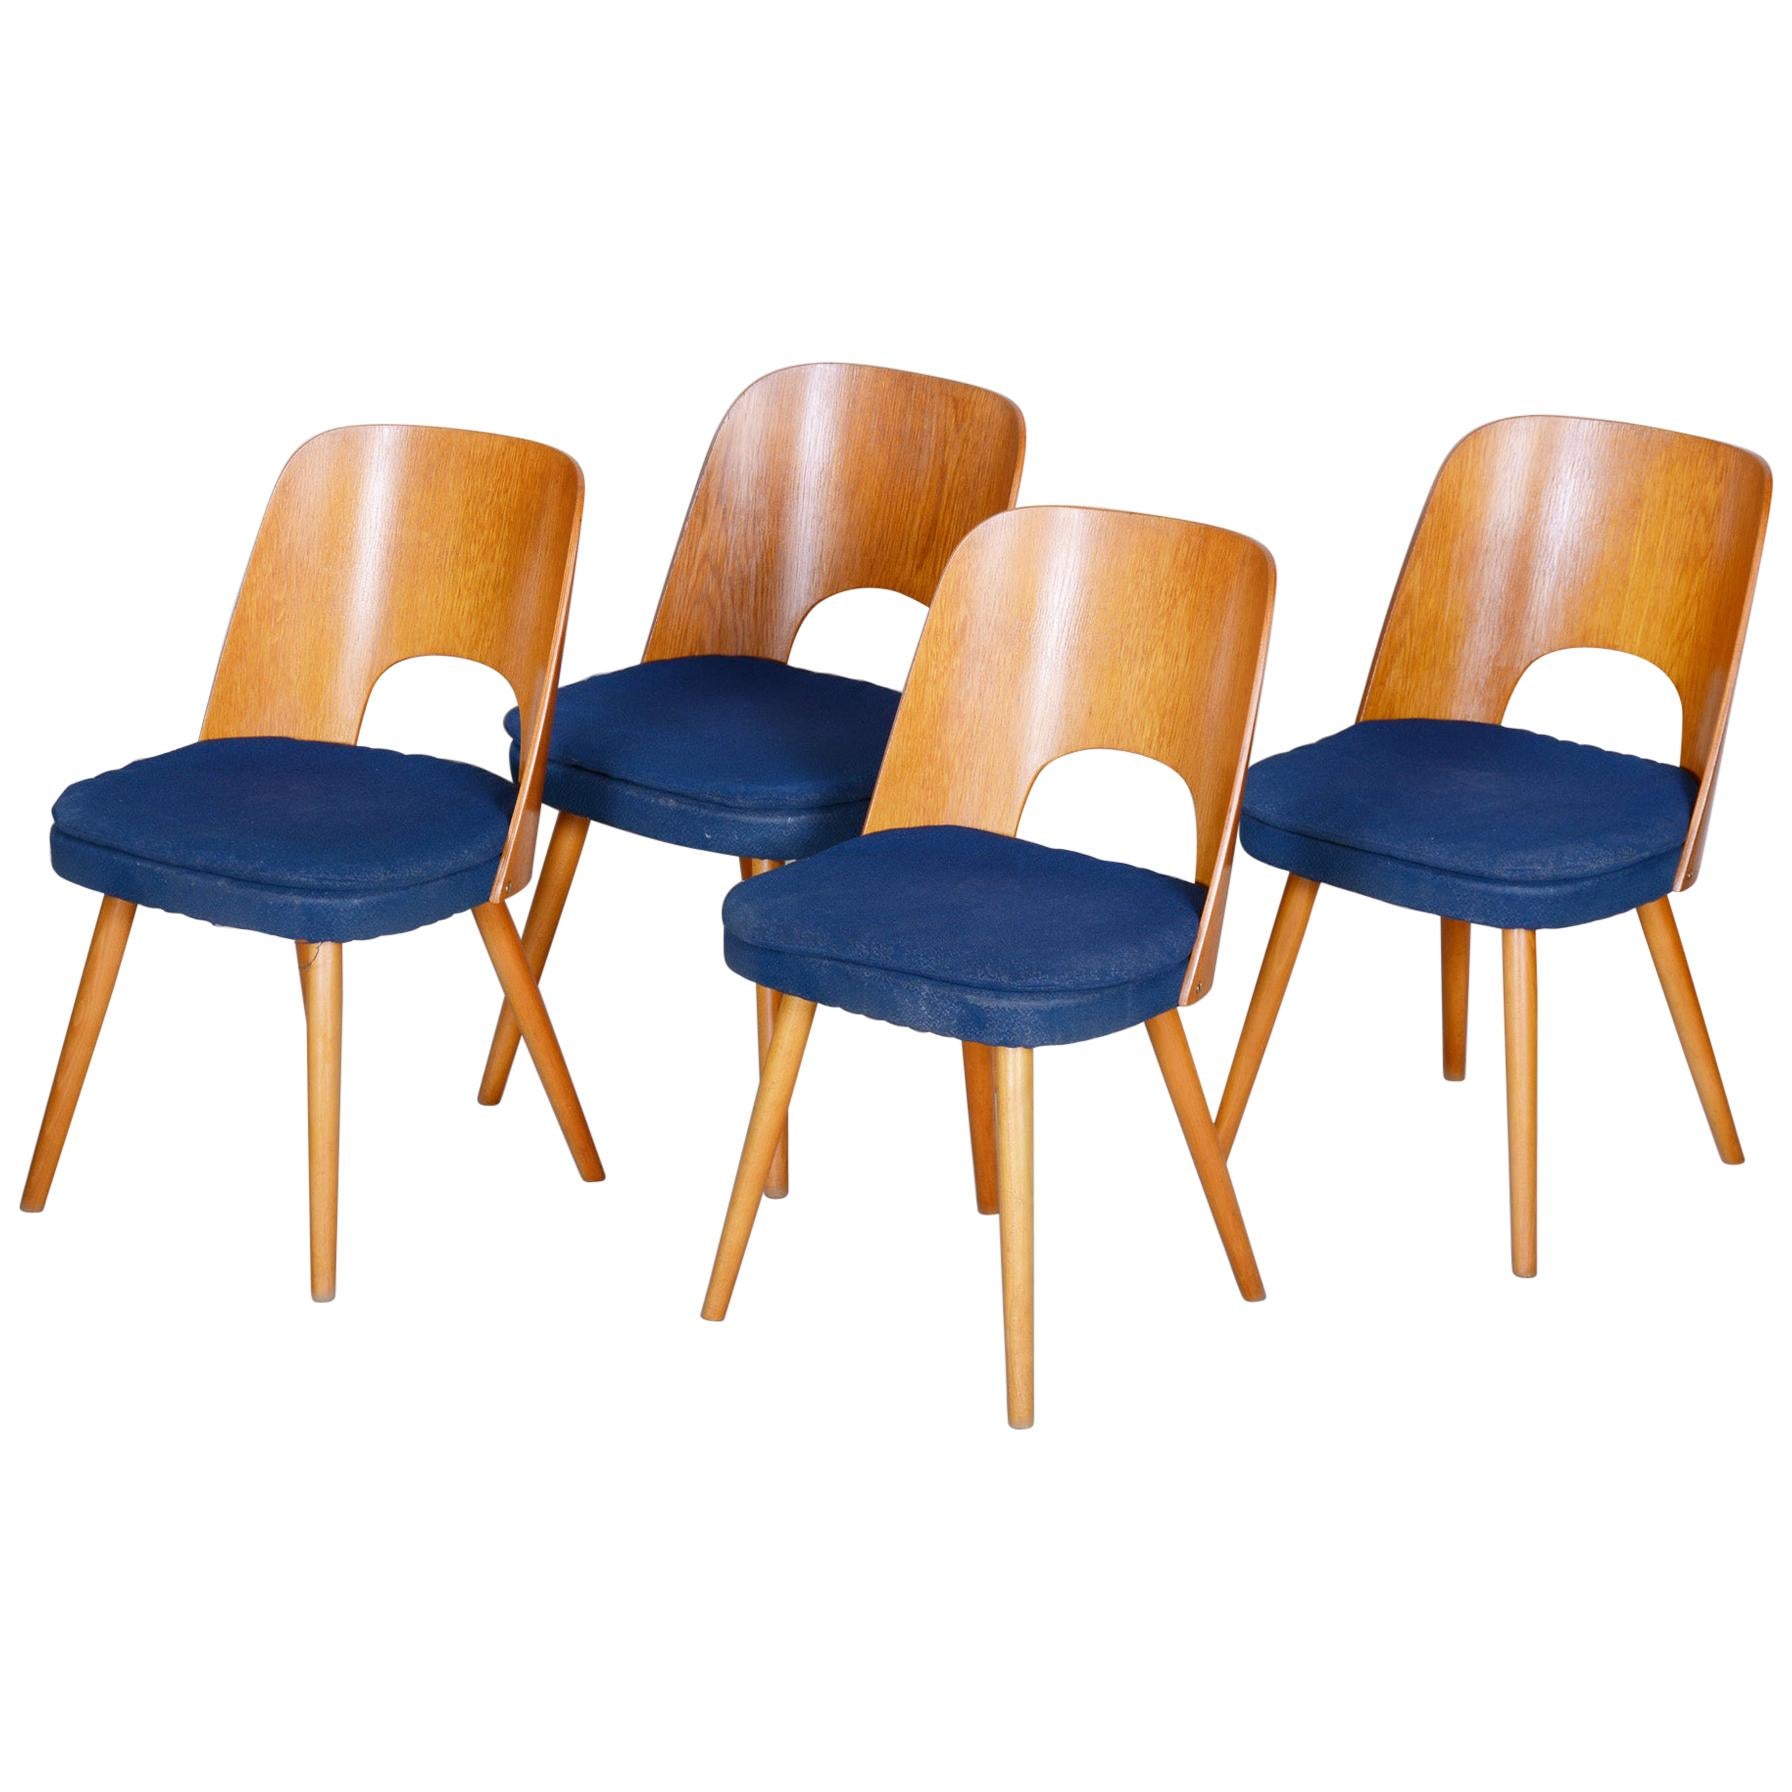 Well preserved Czech Brown and Blue Ash Chairs by Oswald Haerdtl, 4 Pcs, 1950s